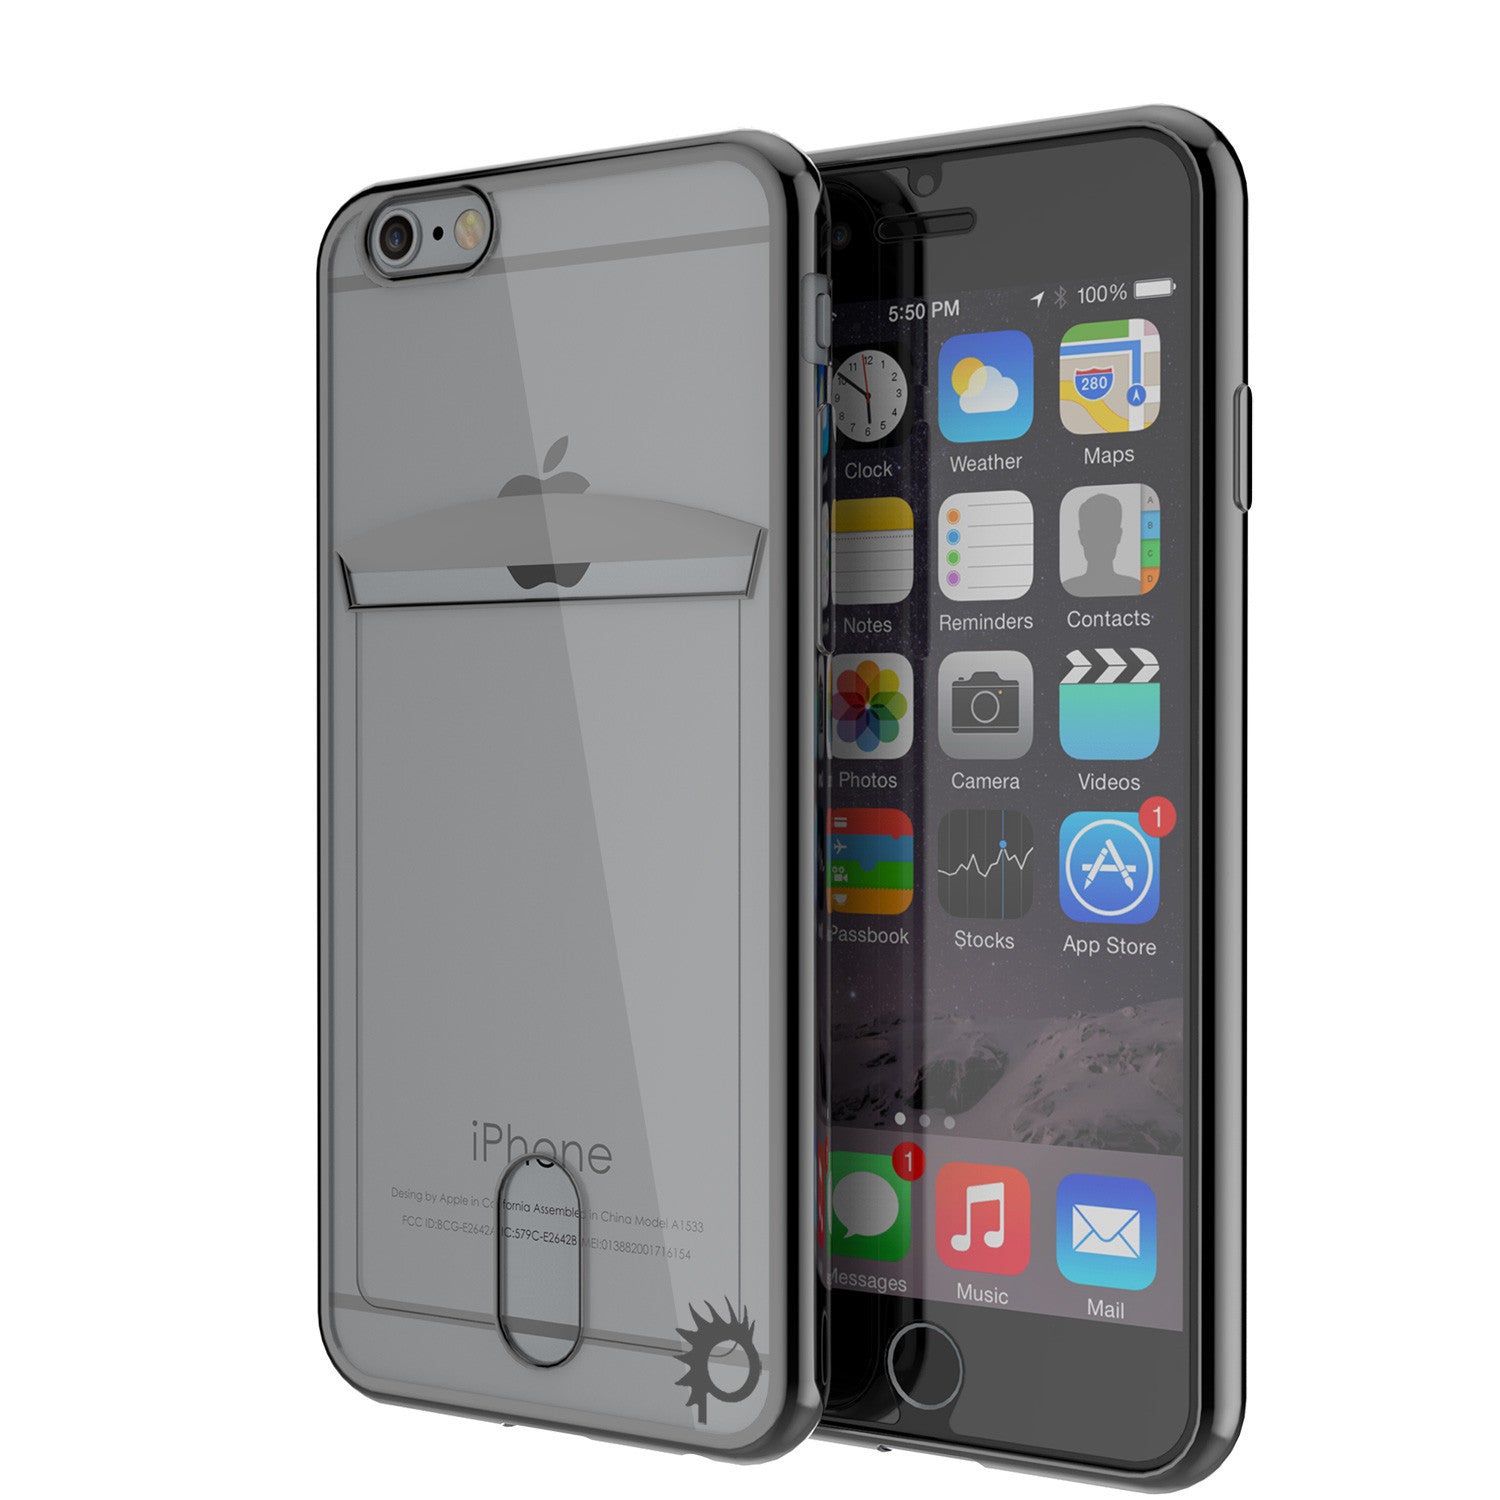 iPhone 6s+ Plus/6+ Plus Case, PUNKCASE® LUCID Black Series | Card Slot | SHIELD Screen Protector (Color in image: Balck)